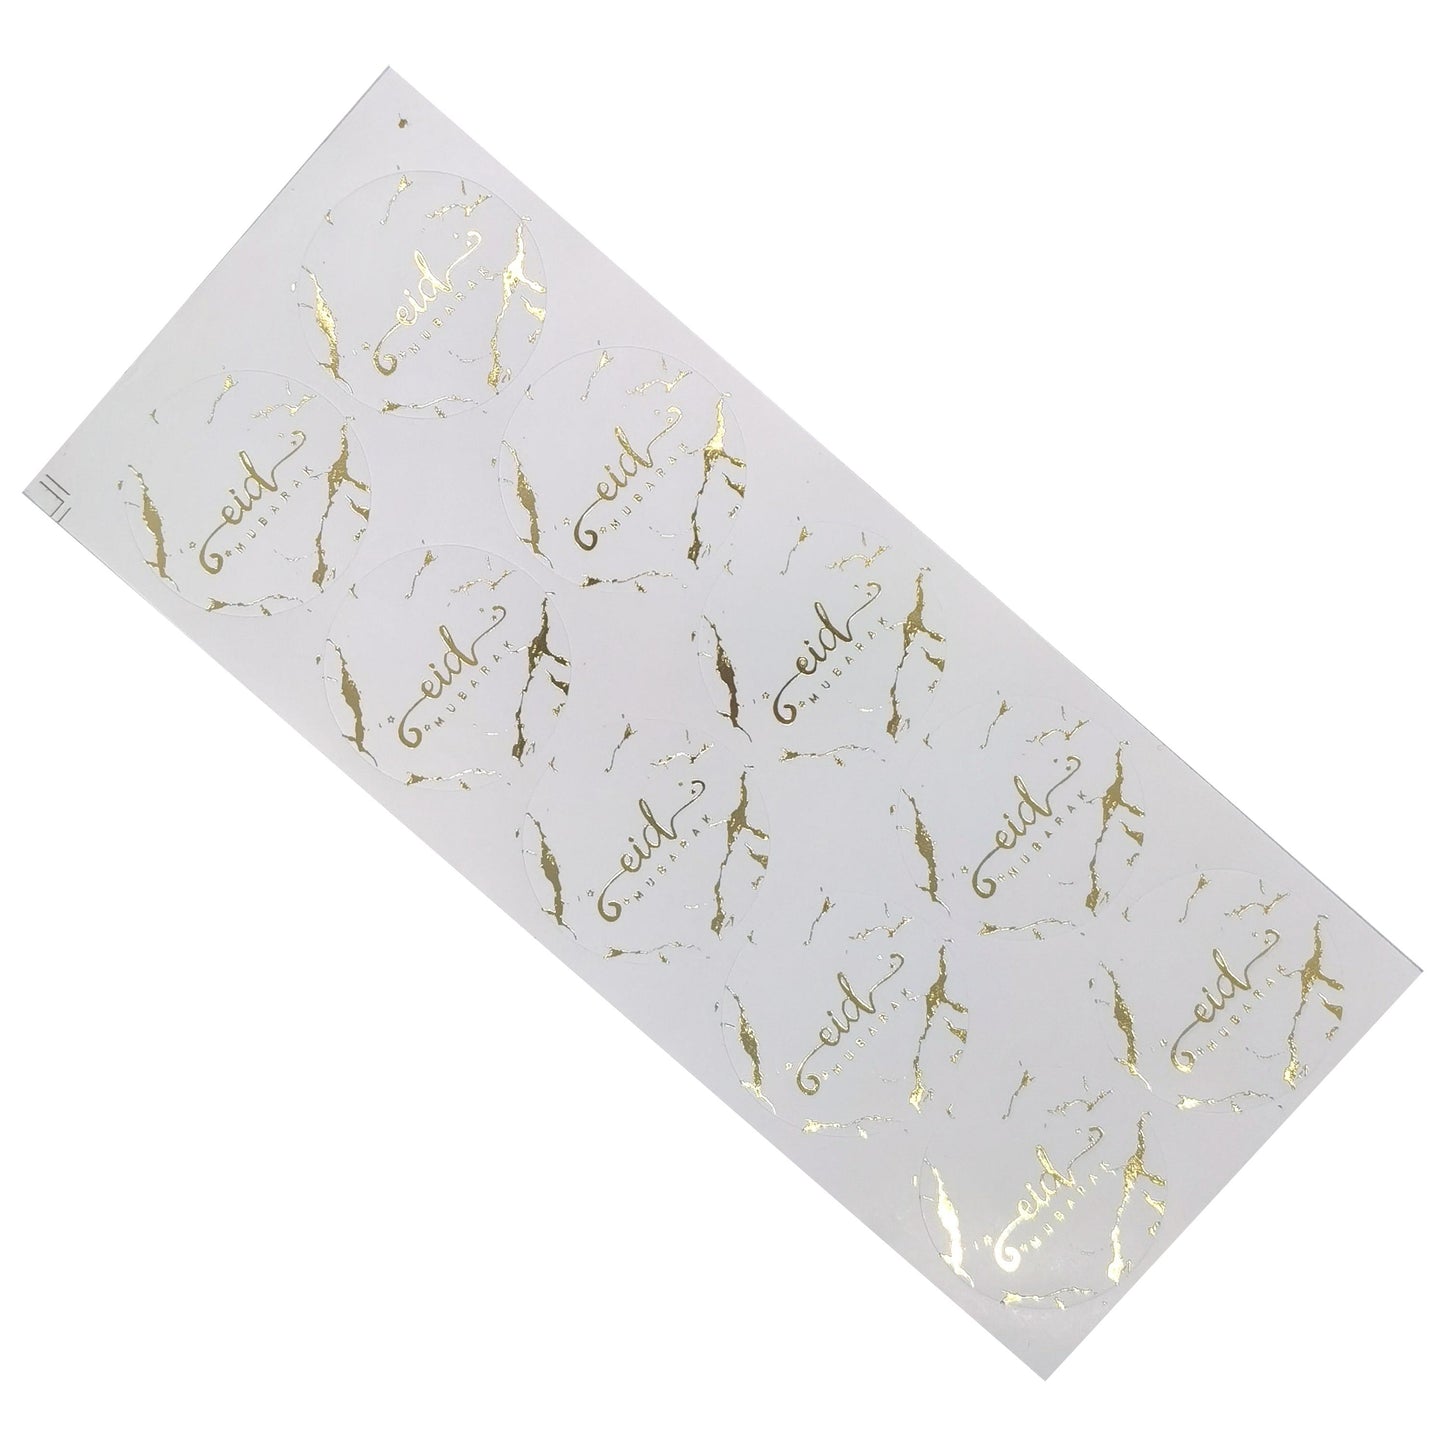 Eid Mubarak Stickers Foil Stamped White & Gold- 10 Pack